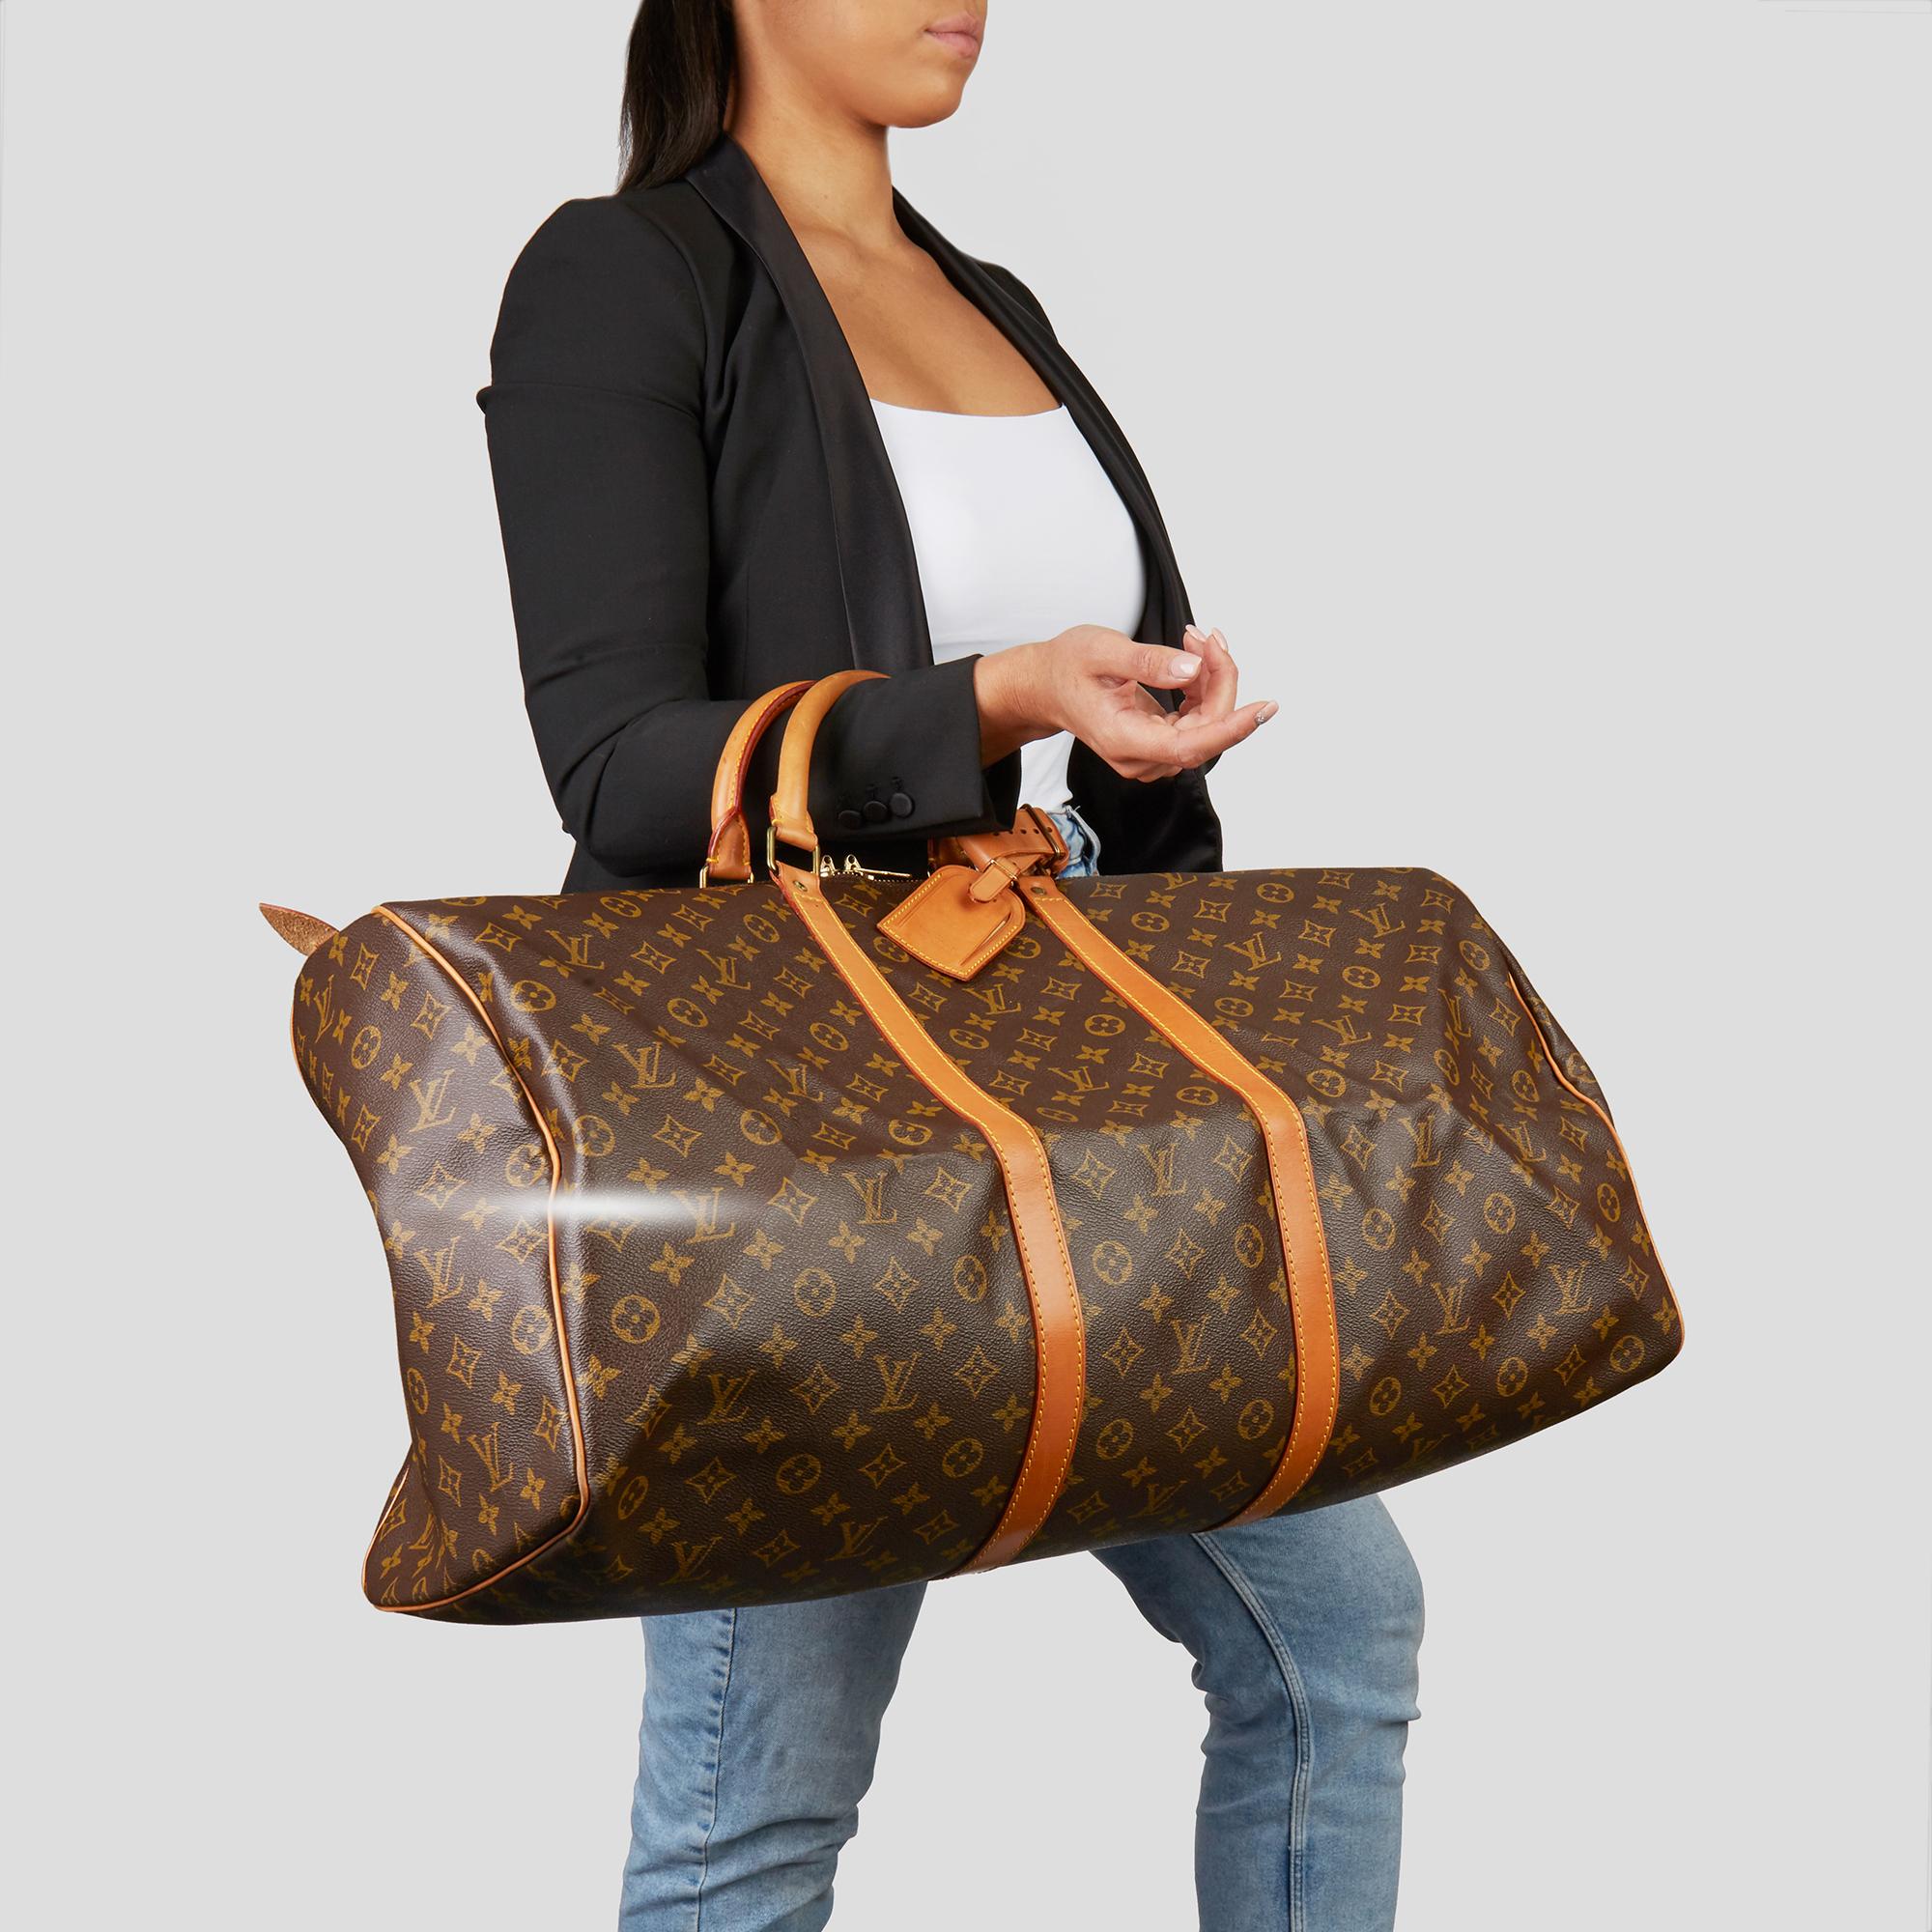 LOUIS VUITTON
Brown Monogram Coated Canvas & Vachetta Leather Vintage Keepall 60

Xupes Reference: HB3491
Serial Number: MI881
Age (Circa): 1988
Accompanied By: Luggage Tag
Authenticity Details: Date Stamp (Made in France) 
Gender: Unisex
Type: